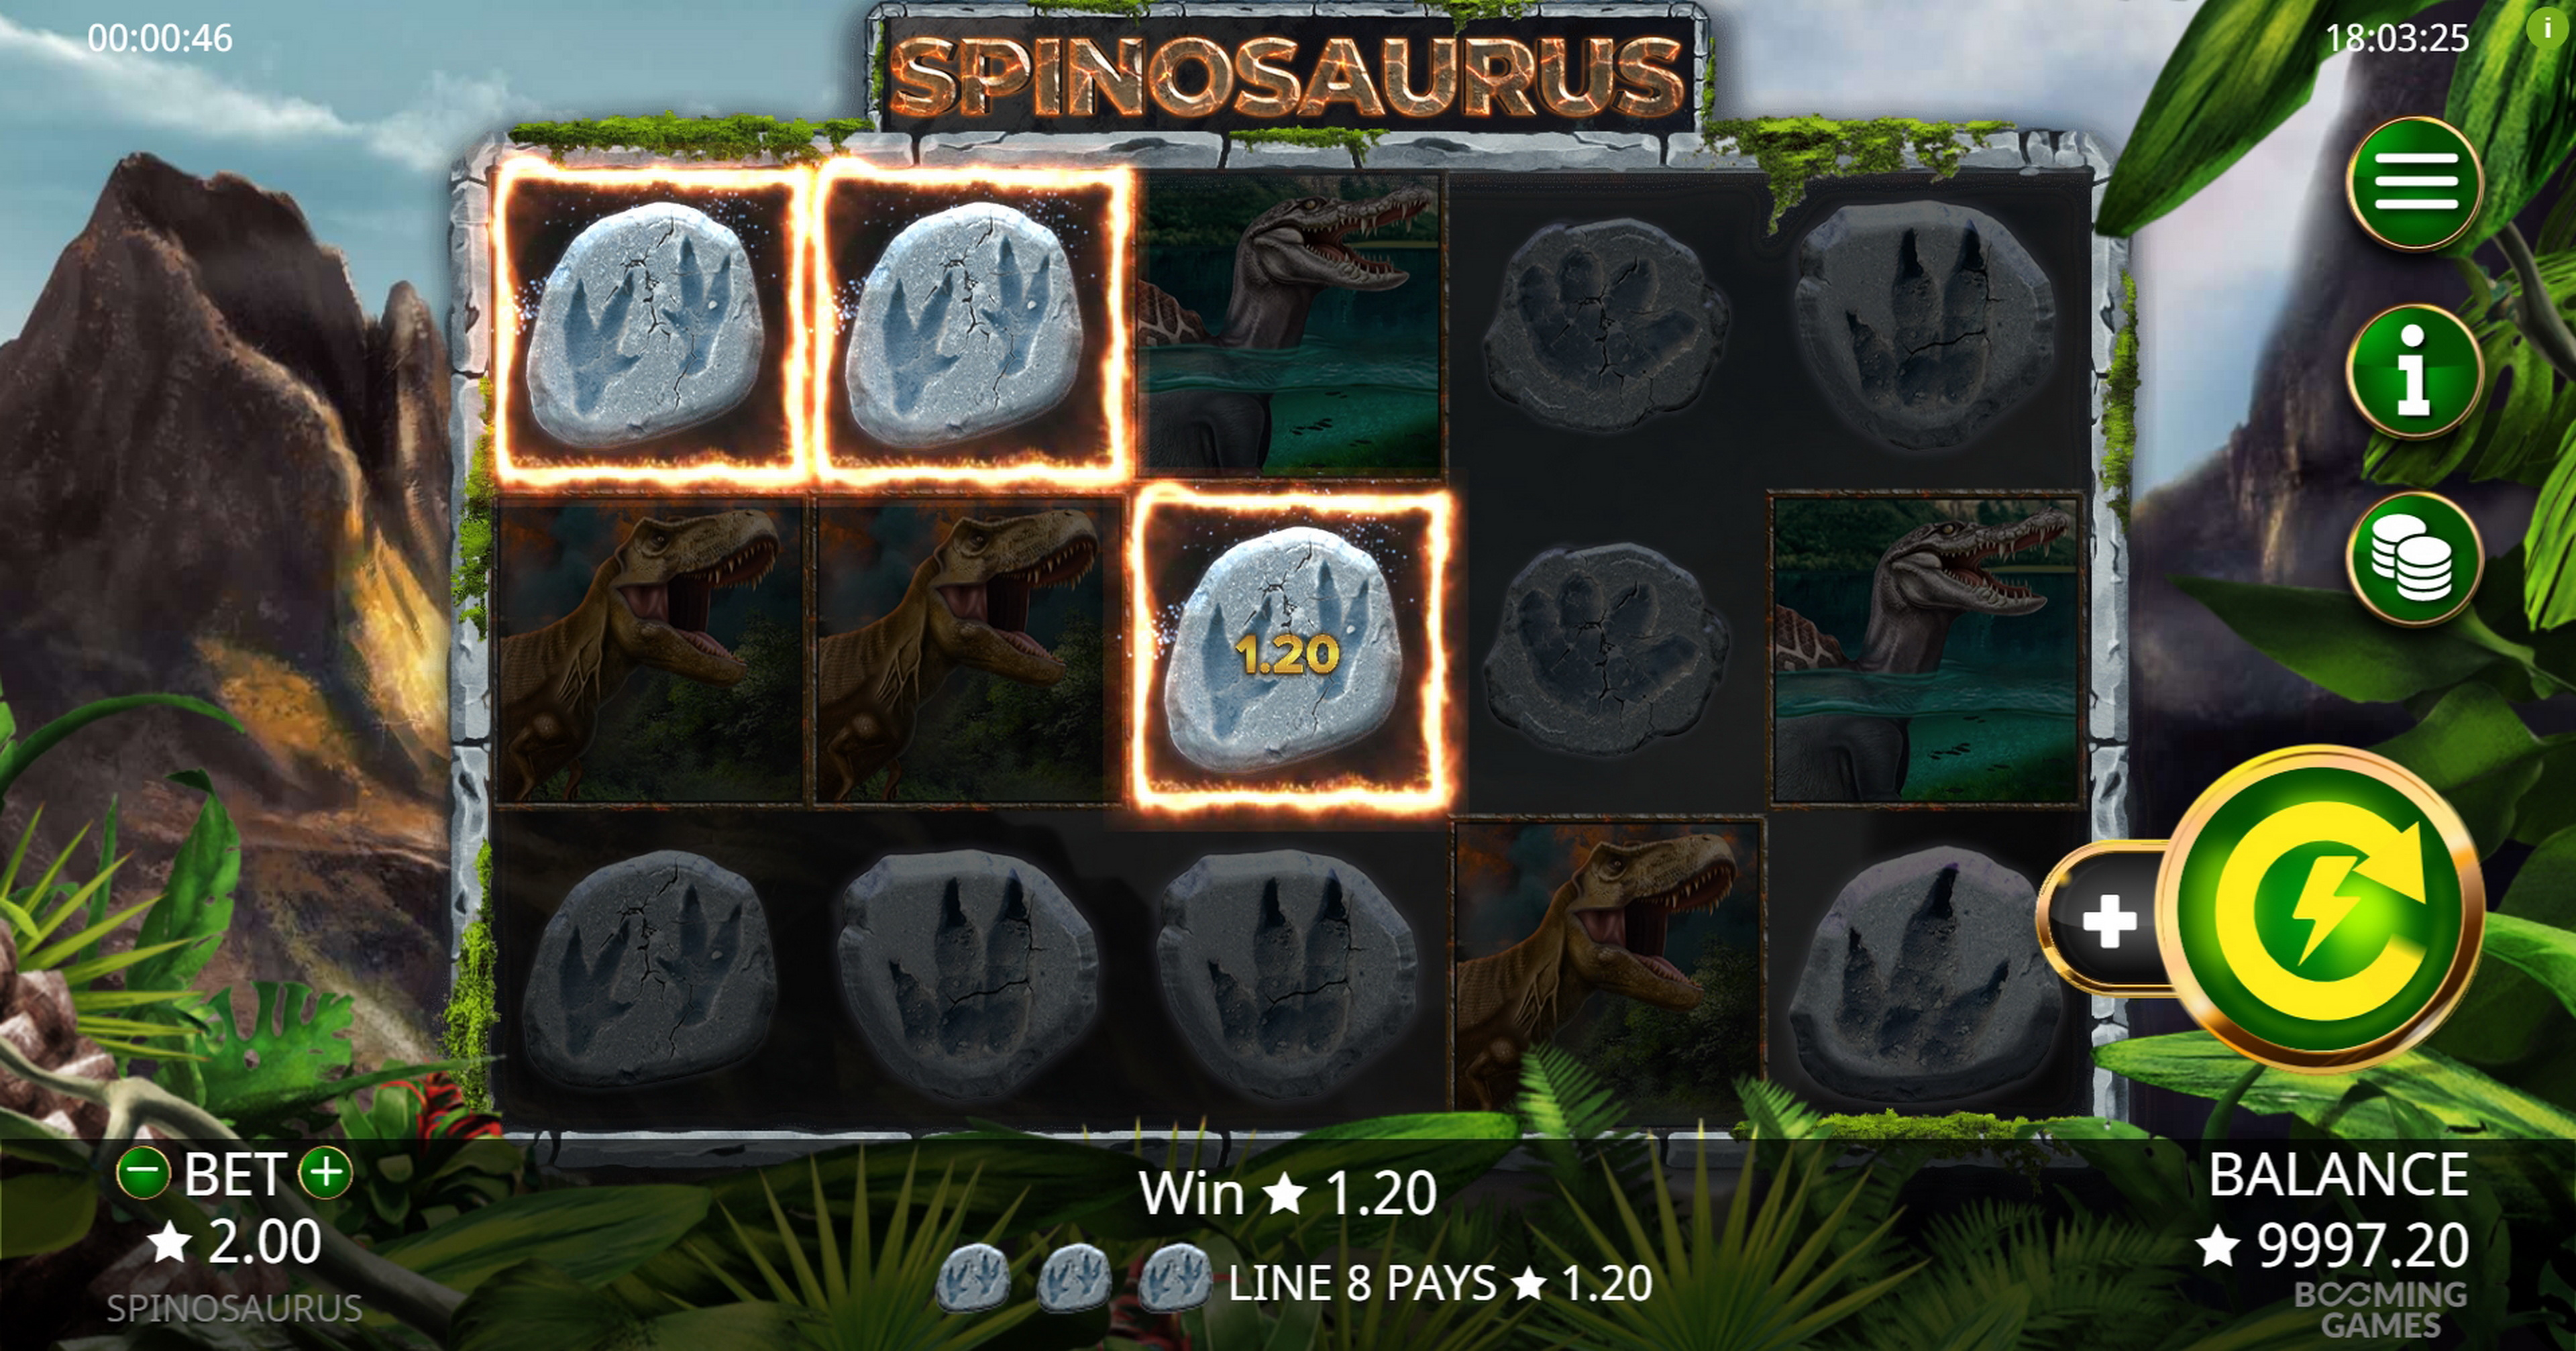 Win Money in Spinosaurus Free Slot Game by Booming Games